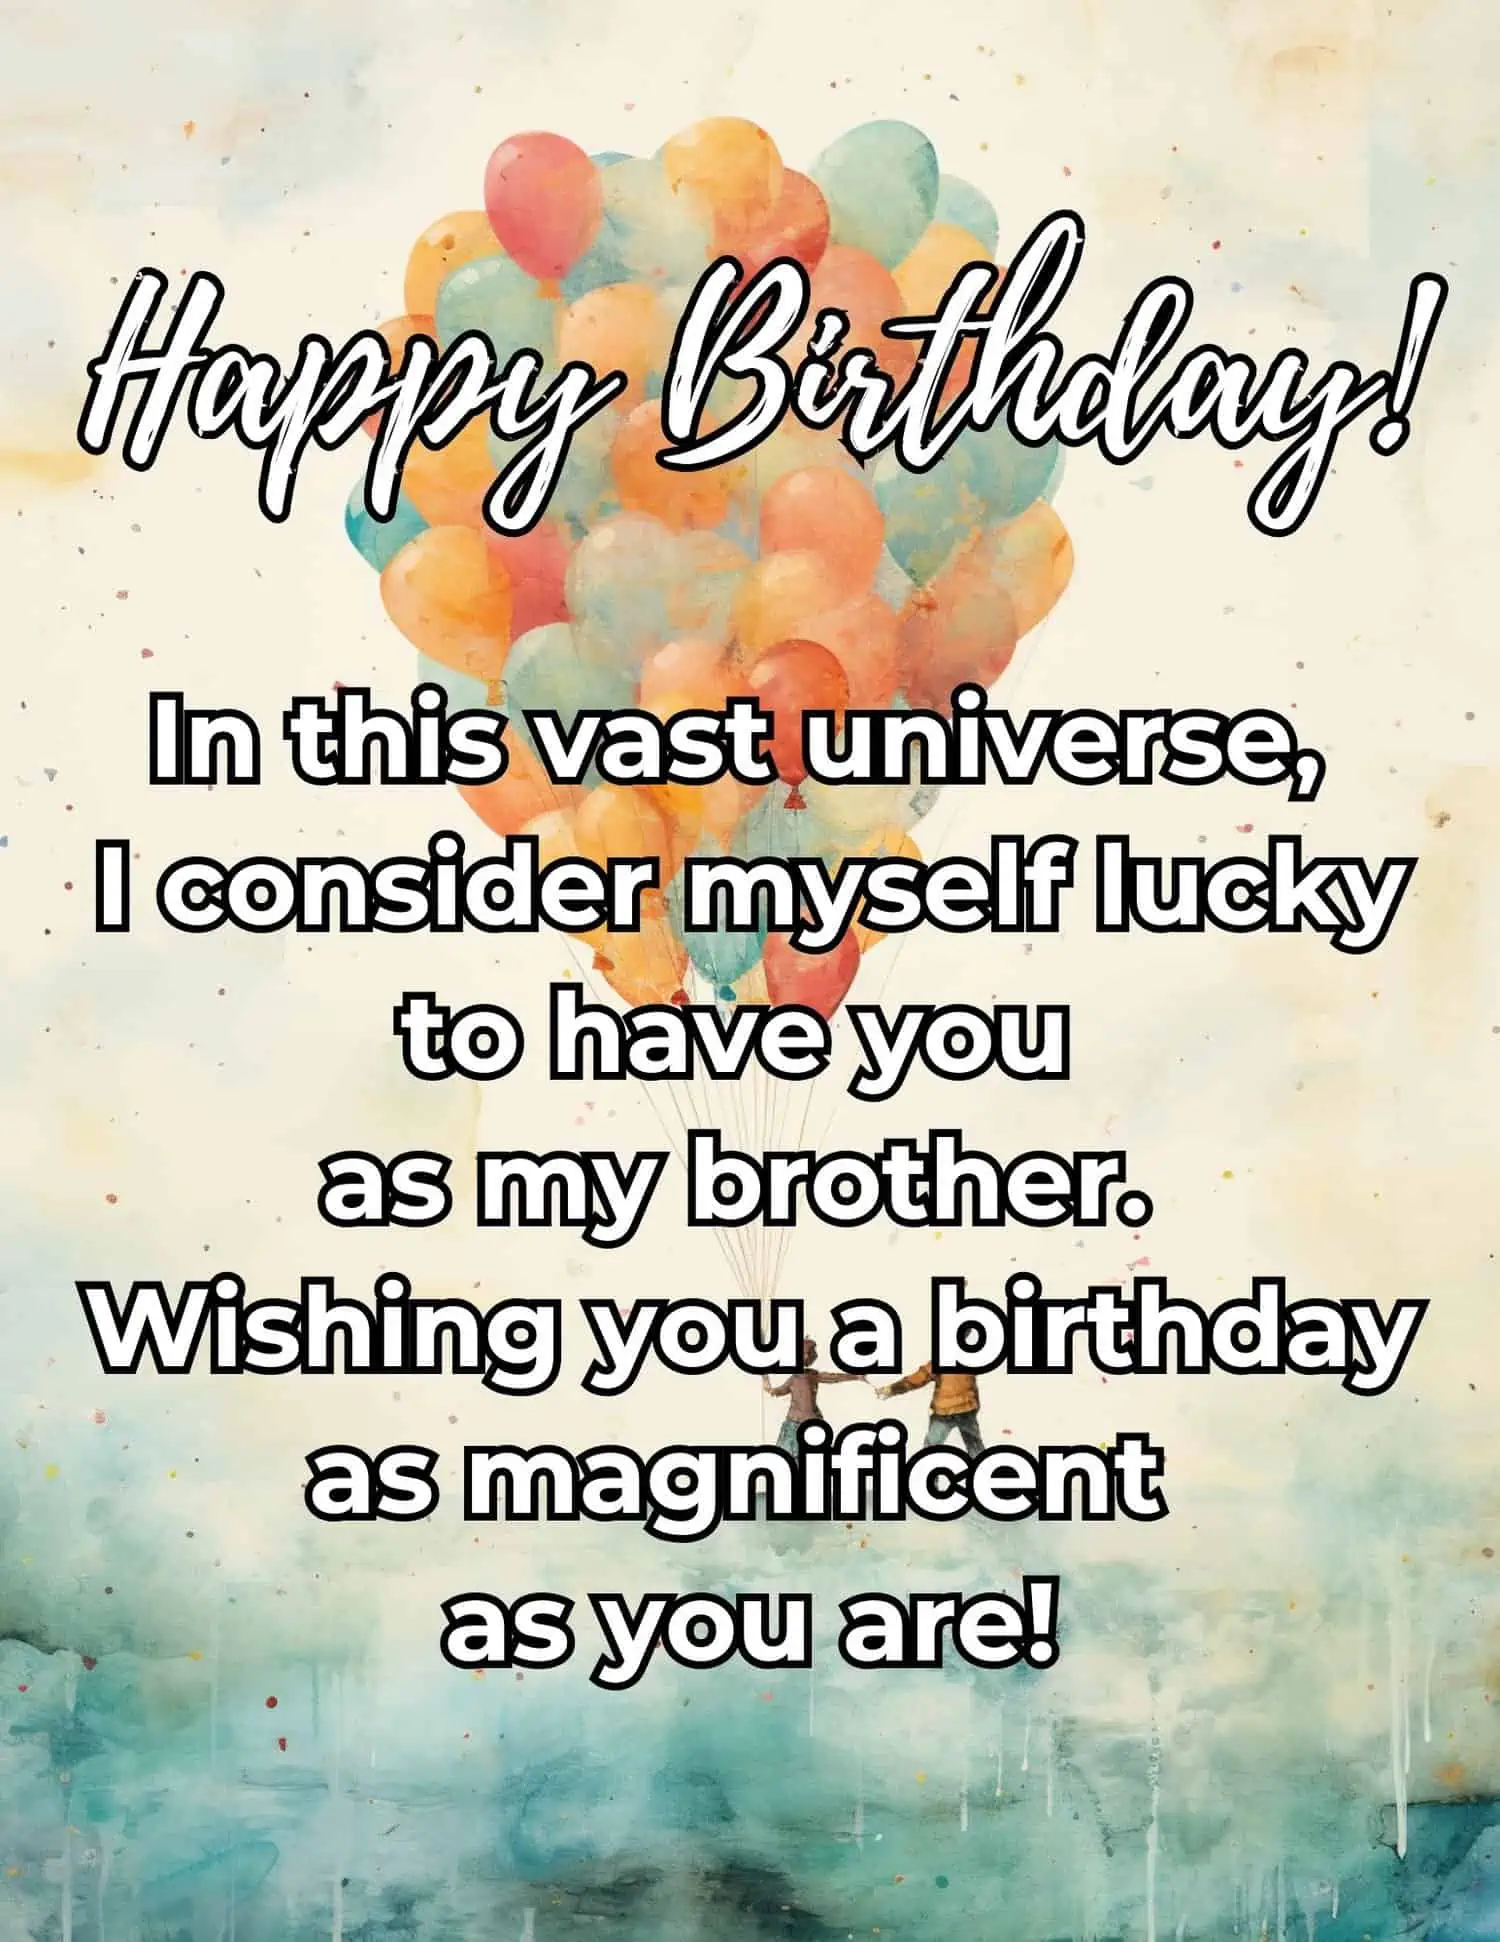 A compilation of heartfelt and detailed birthday messages dedicated to your brother.